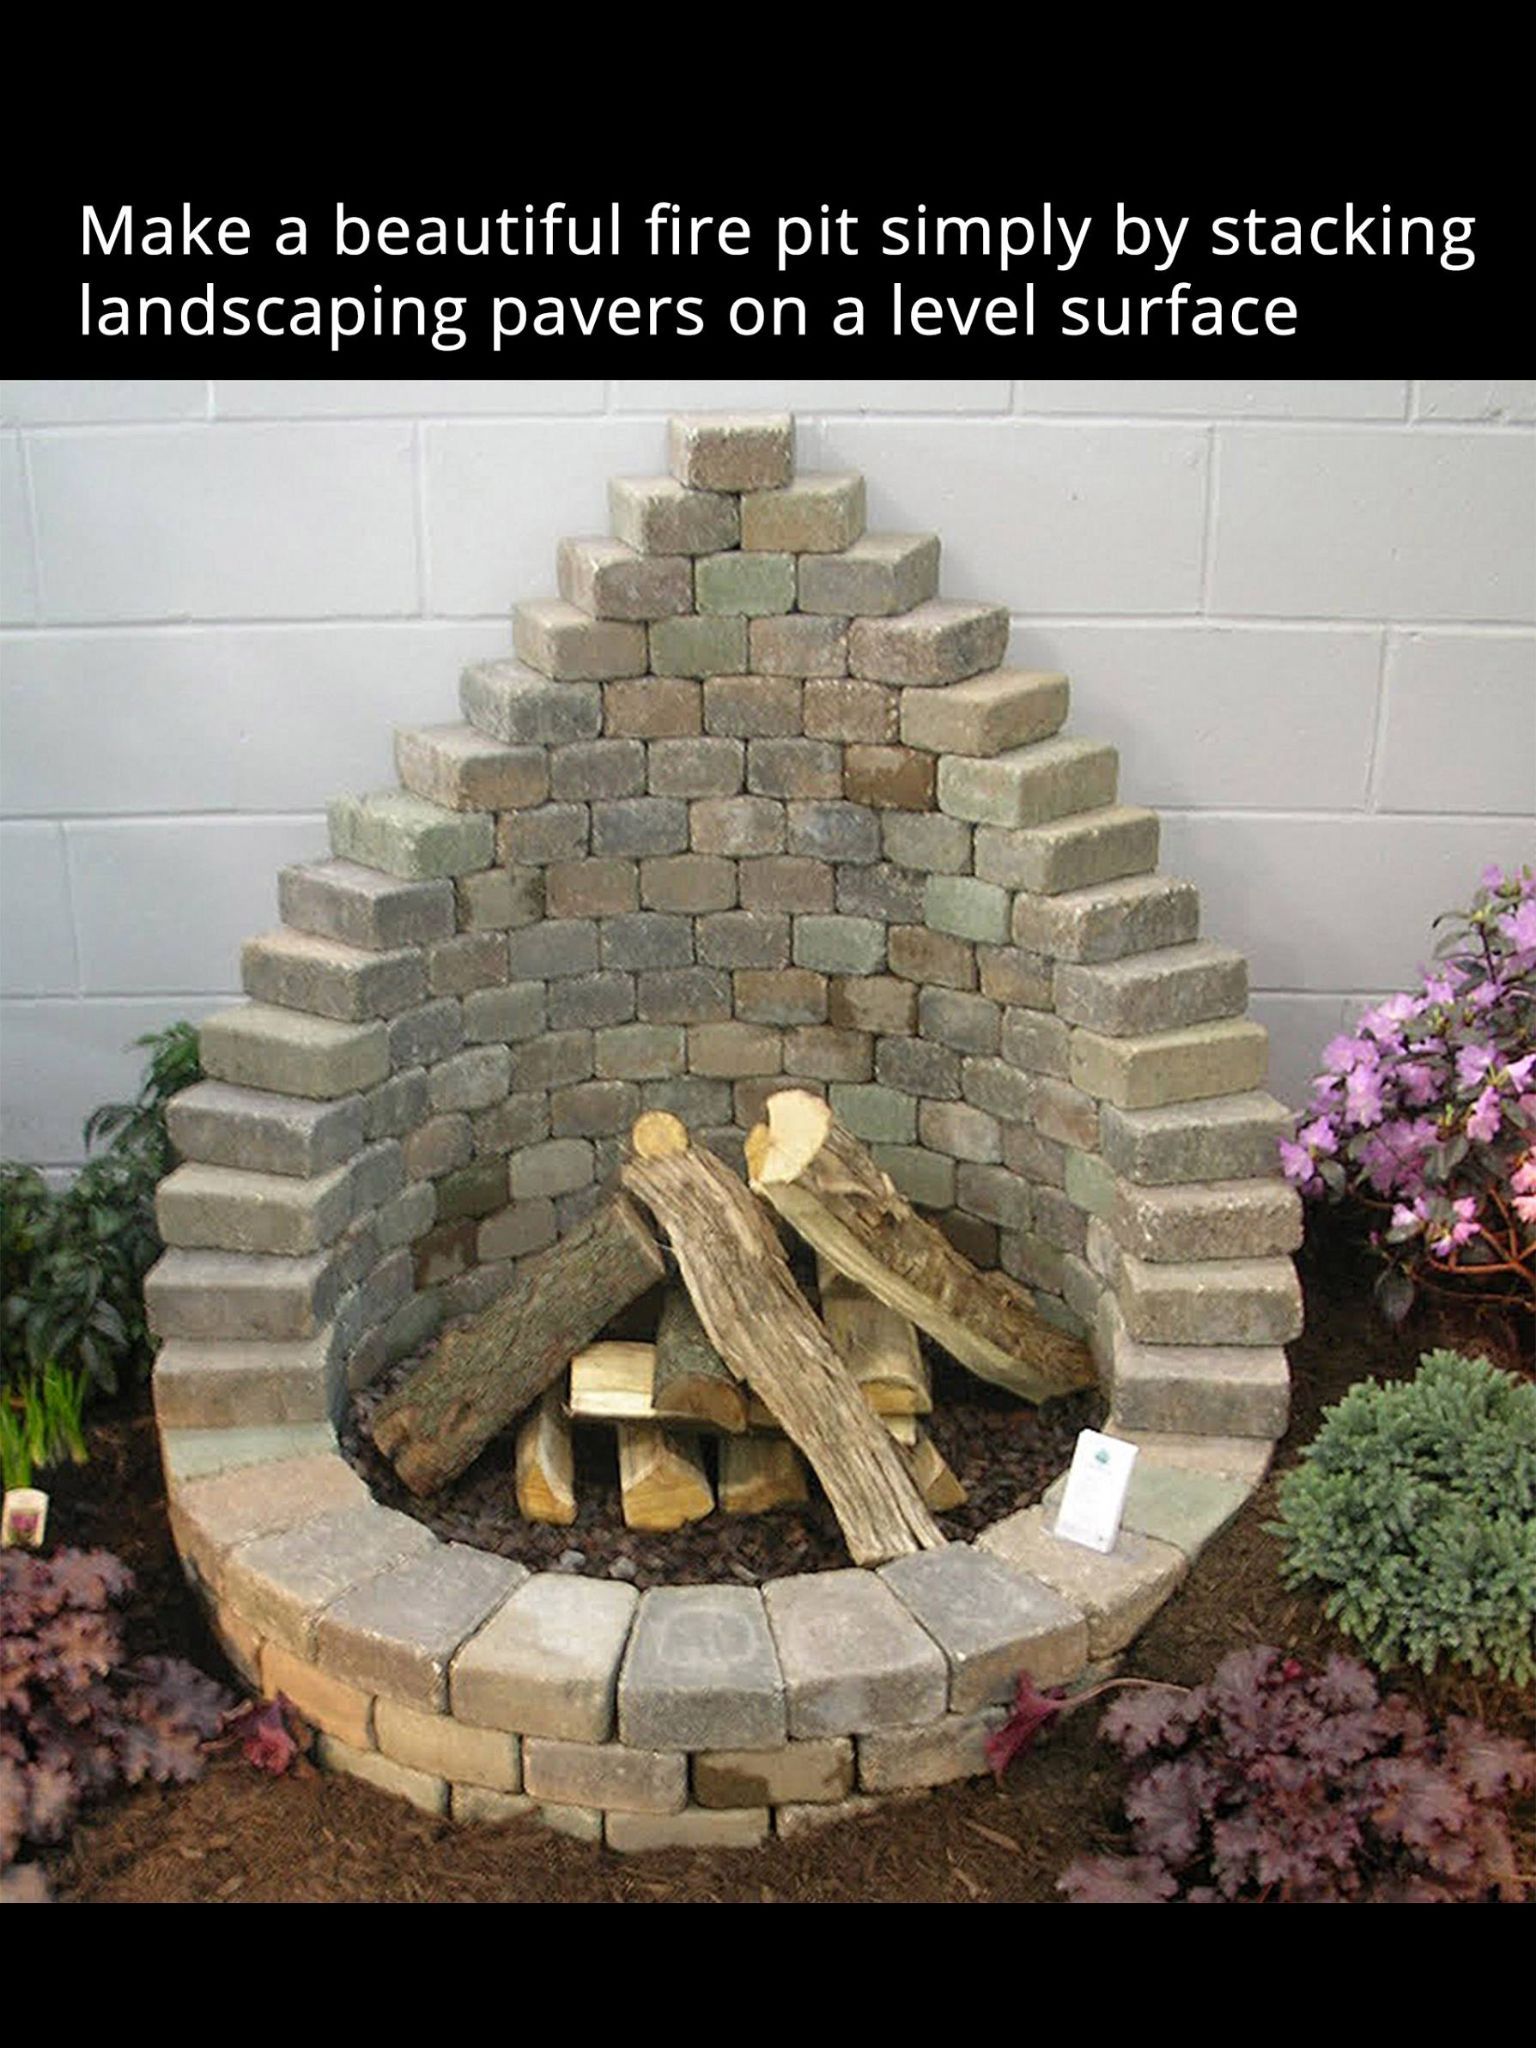 Simple stone fire pit using stone pavers. Relax in your own back yard!